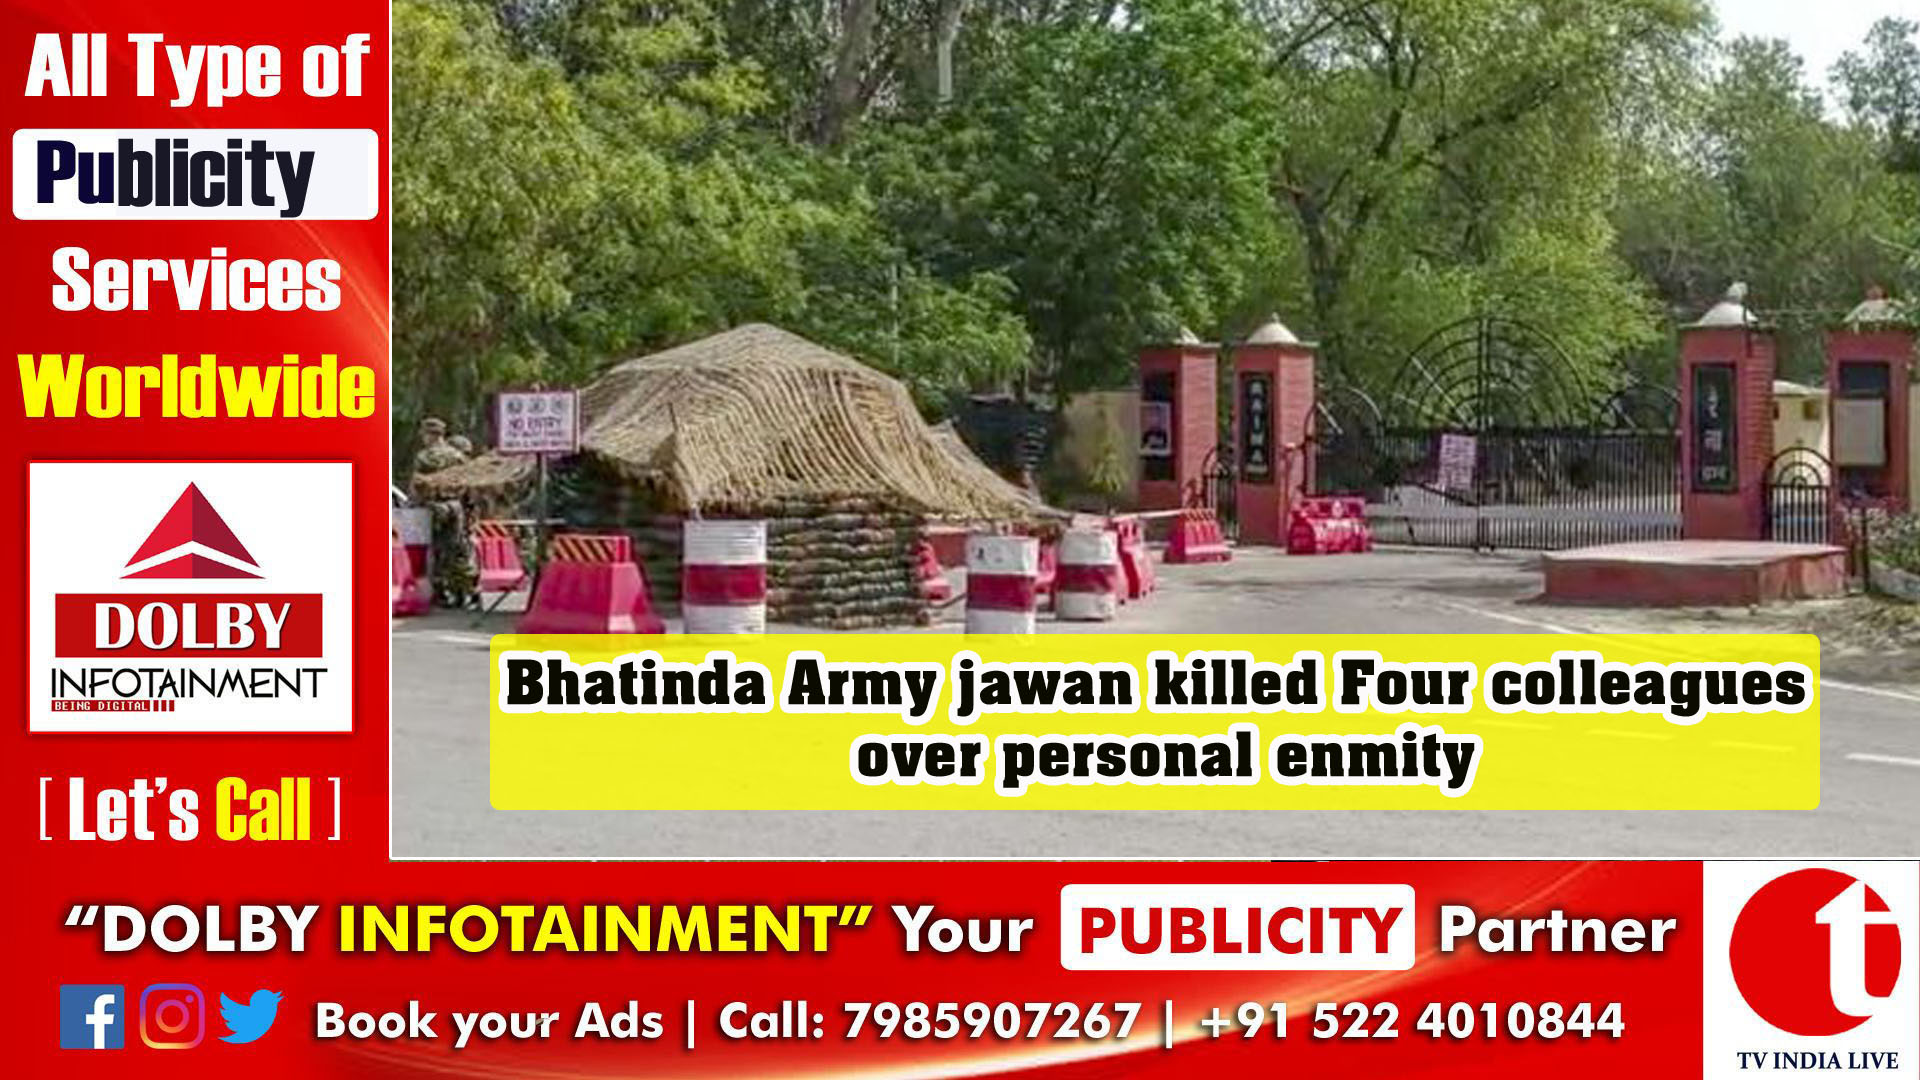 Bhatinda Army jawan killed Four colleagues over personal enmity